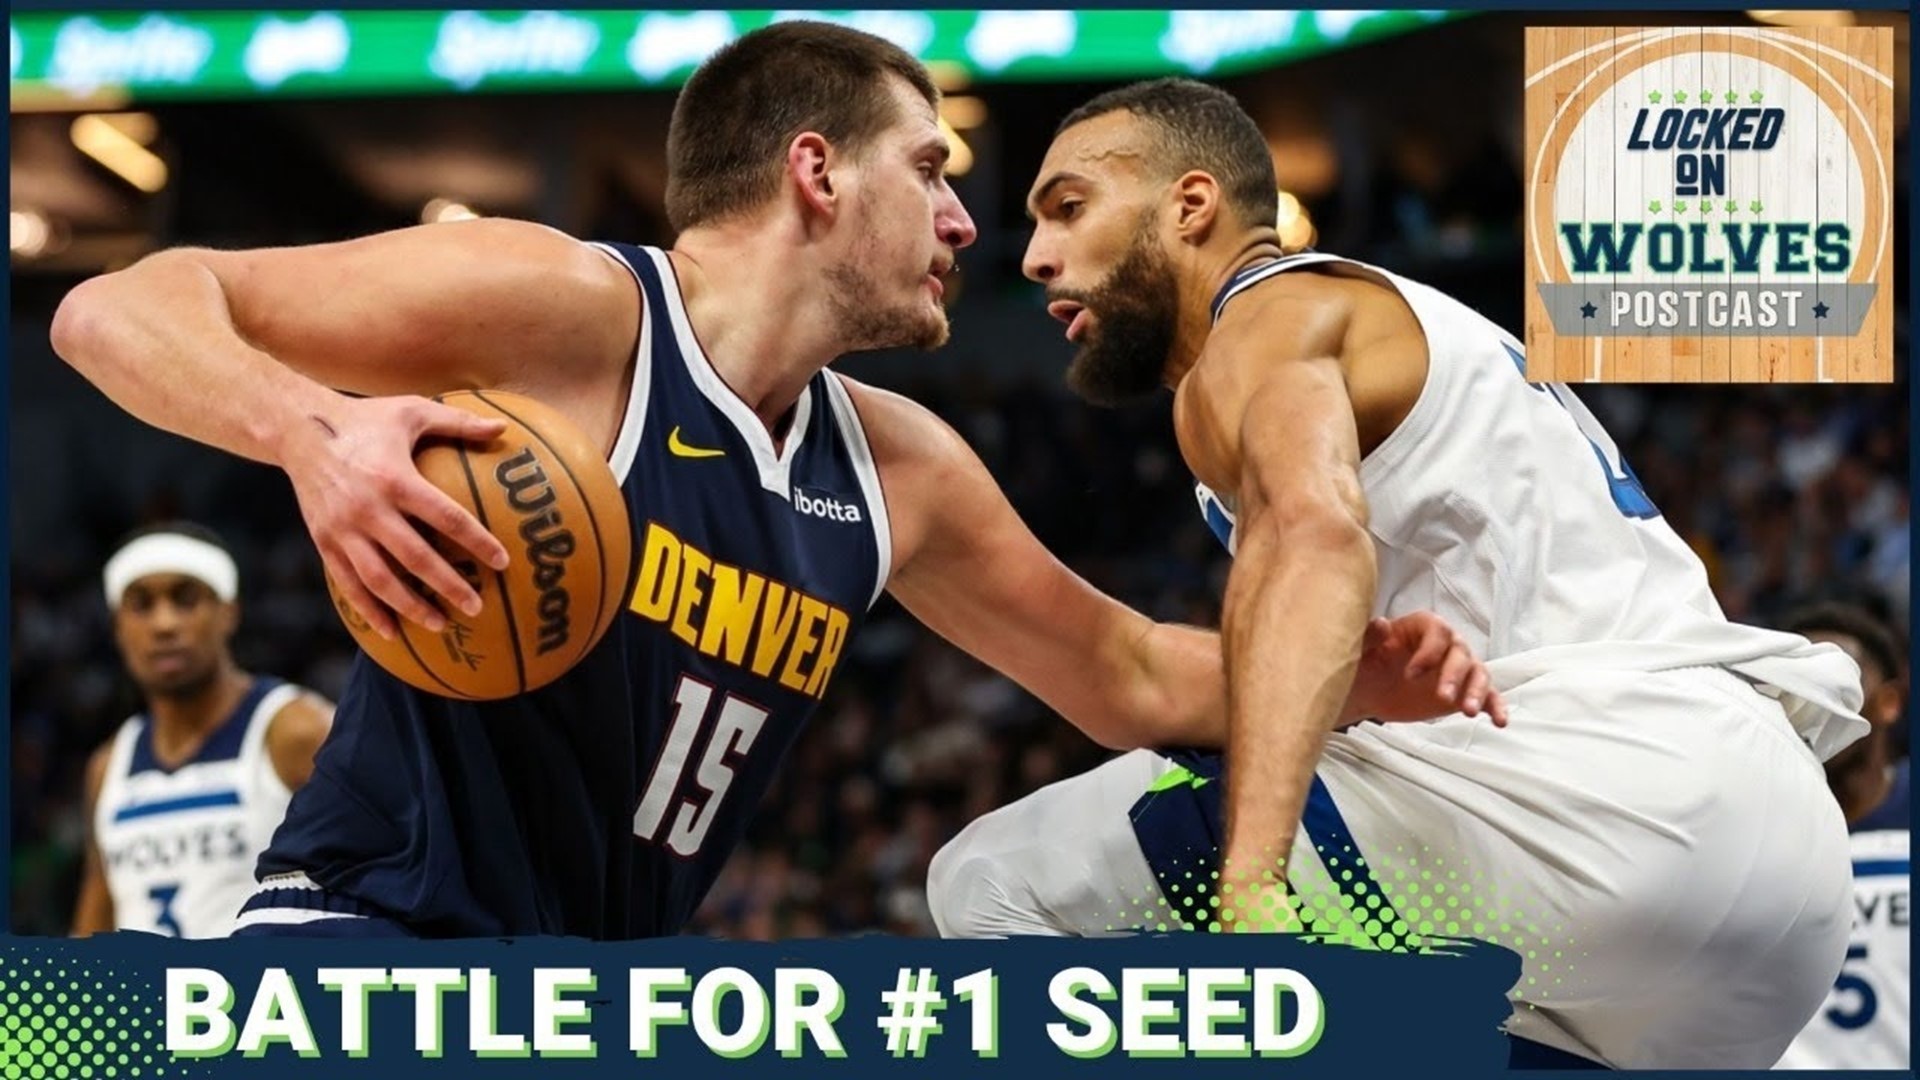 The Minnesota Timberwolves travel to Denver and shock the Nuggets 111-98 to regain the top seed in the Western Conference.